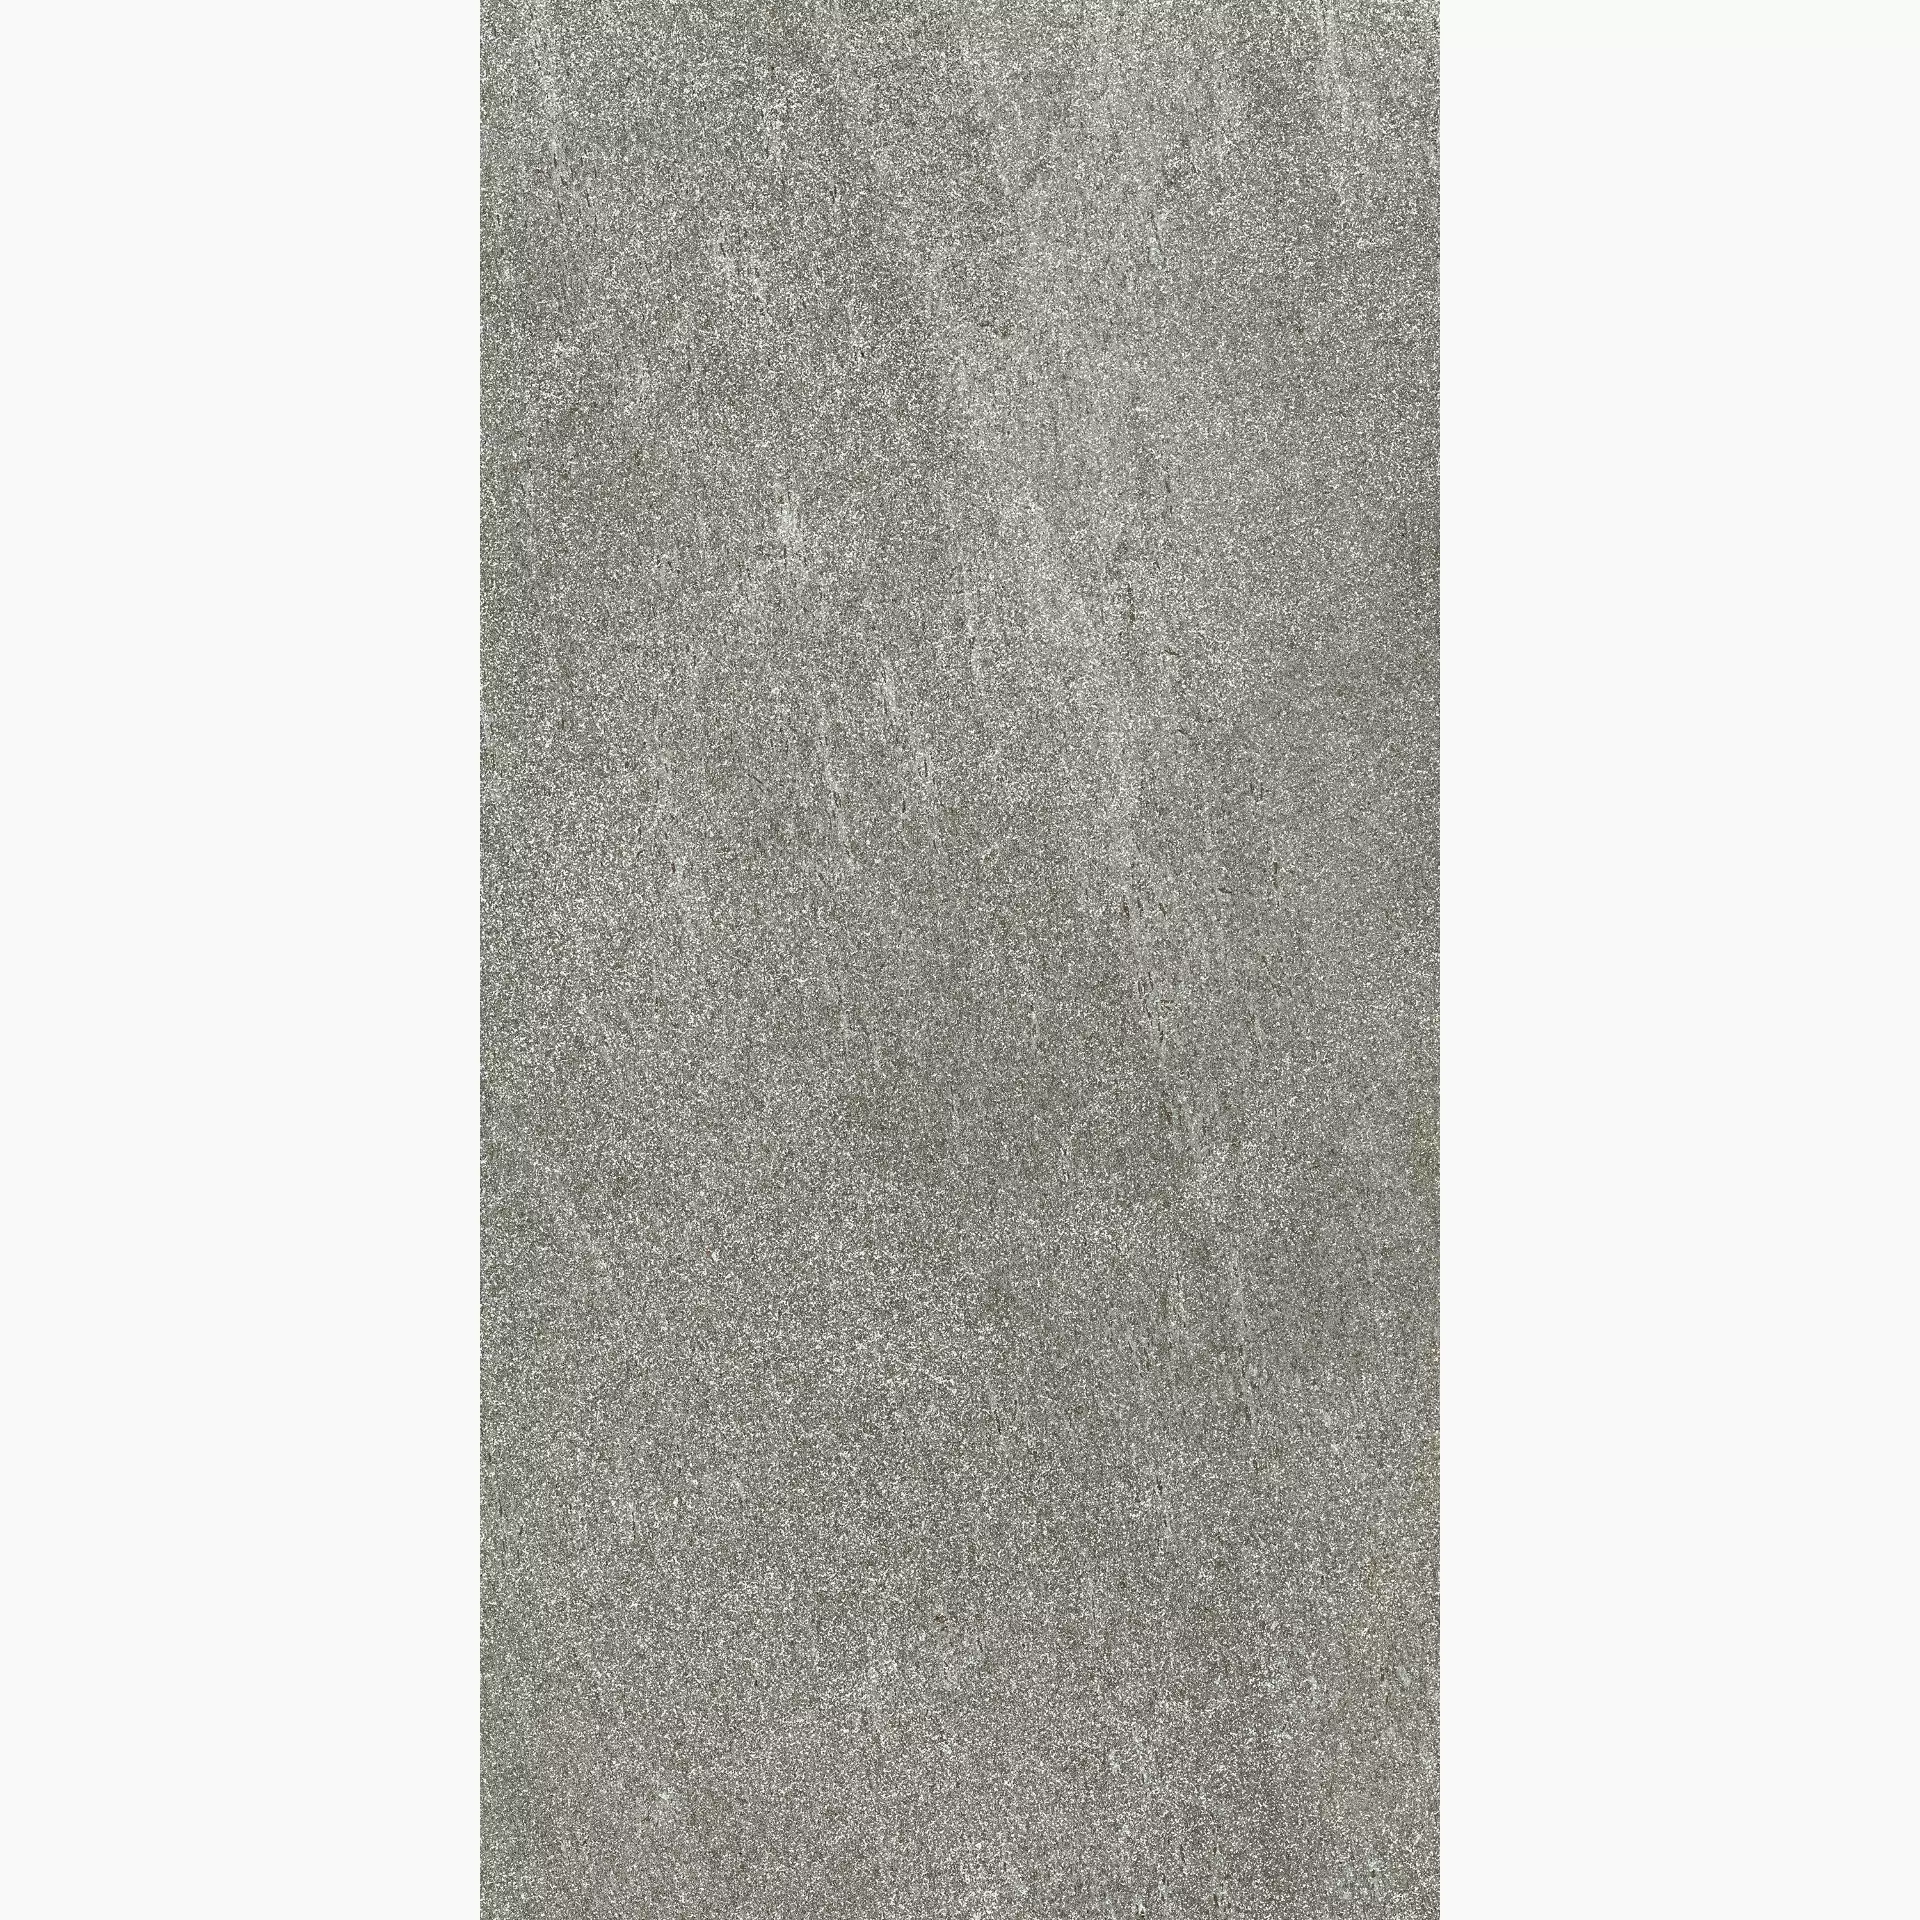 Cottodeste Blend Stone Mid Hammered Protect EGXBS80 60x120cm rectified 20mm